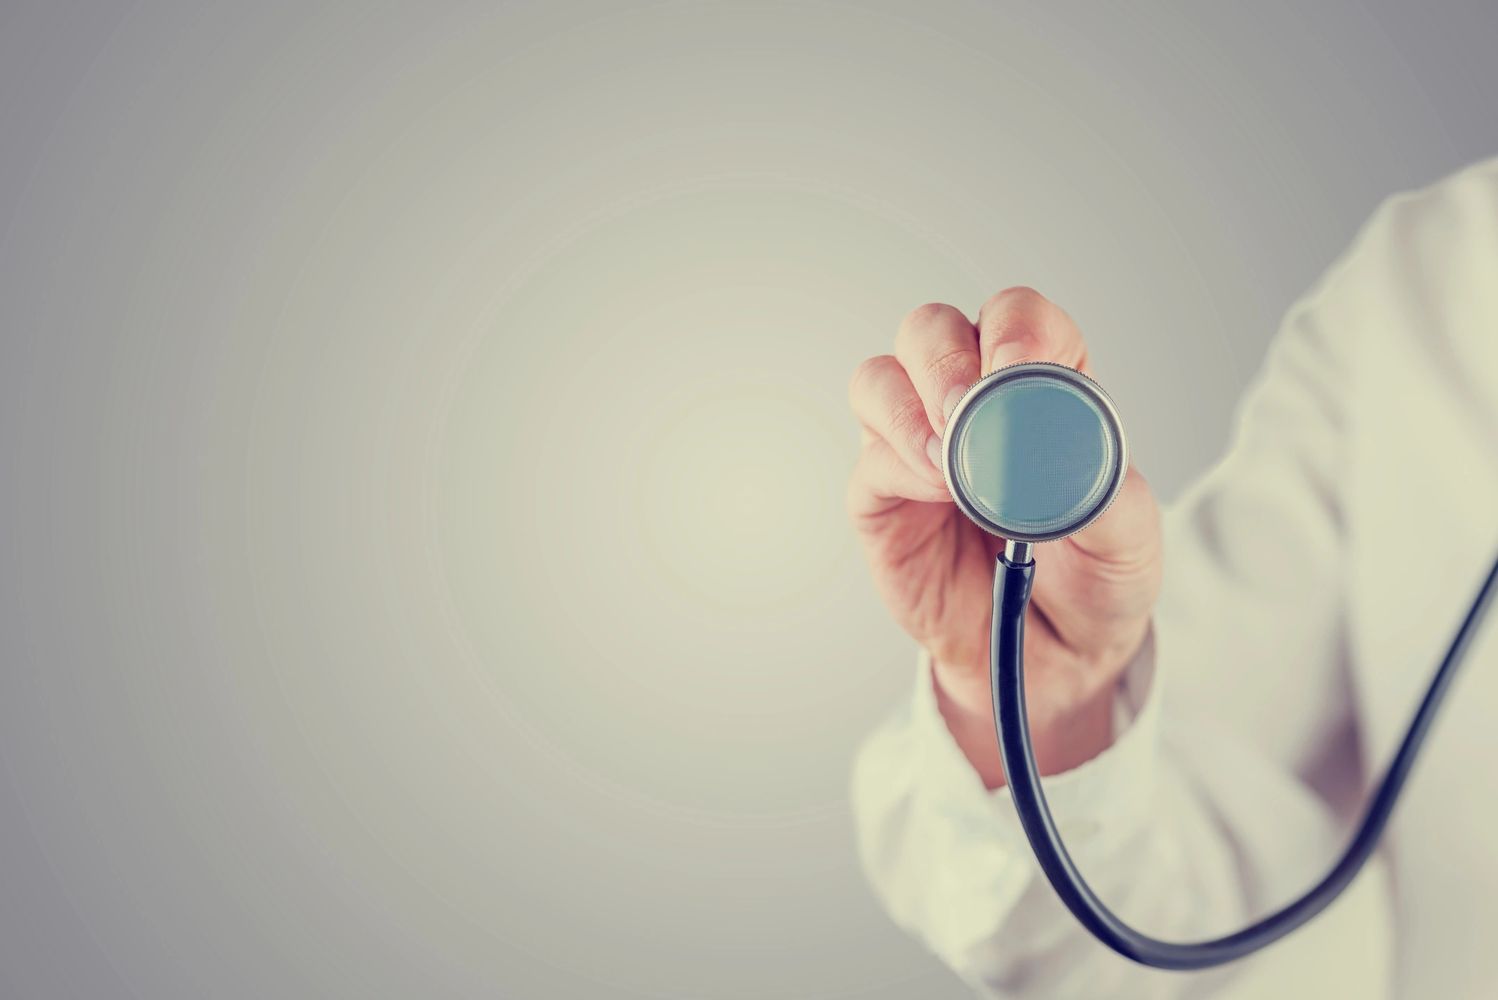 stock image of a person holding up a stethoscope